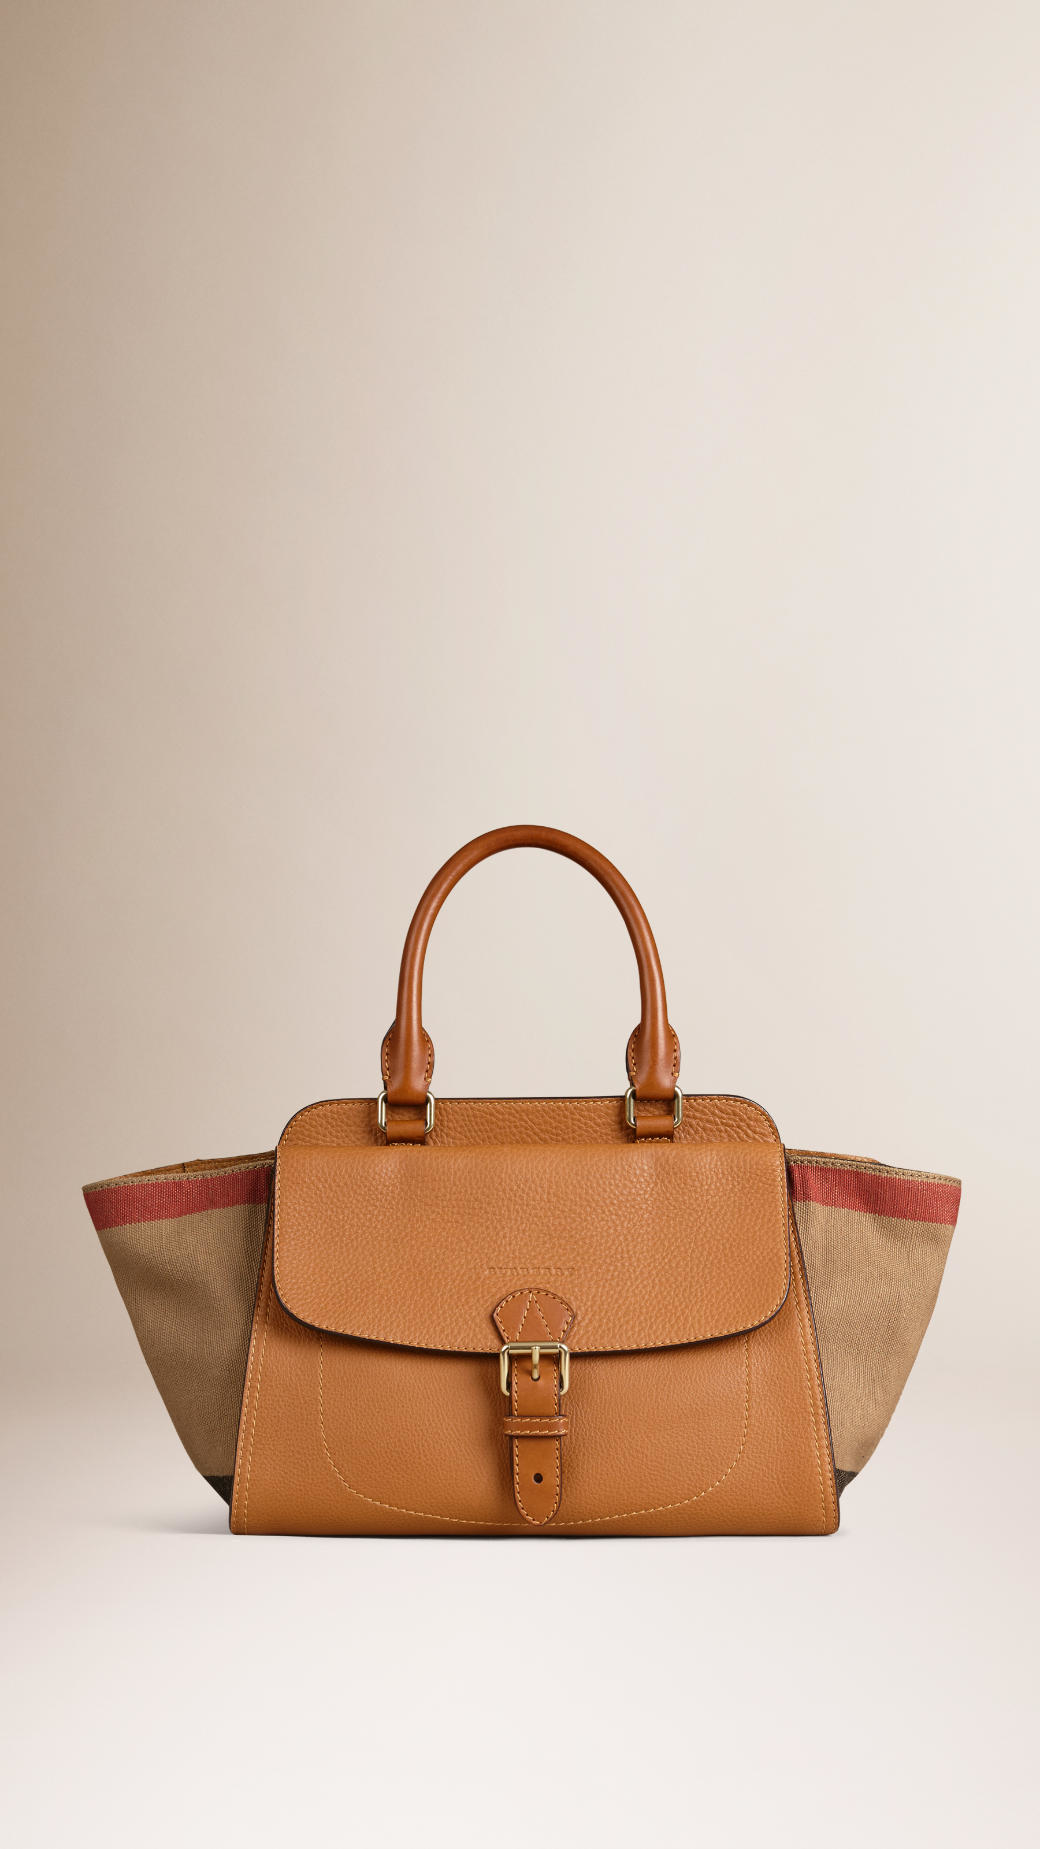 Burberry Medium Canvas Check And Leather Tote Bag in Brown (saddle brown) | Lyst